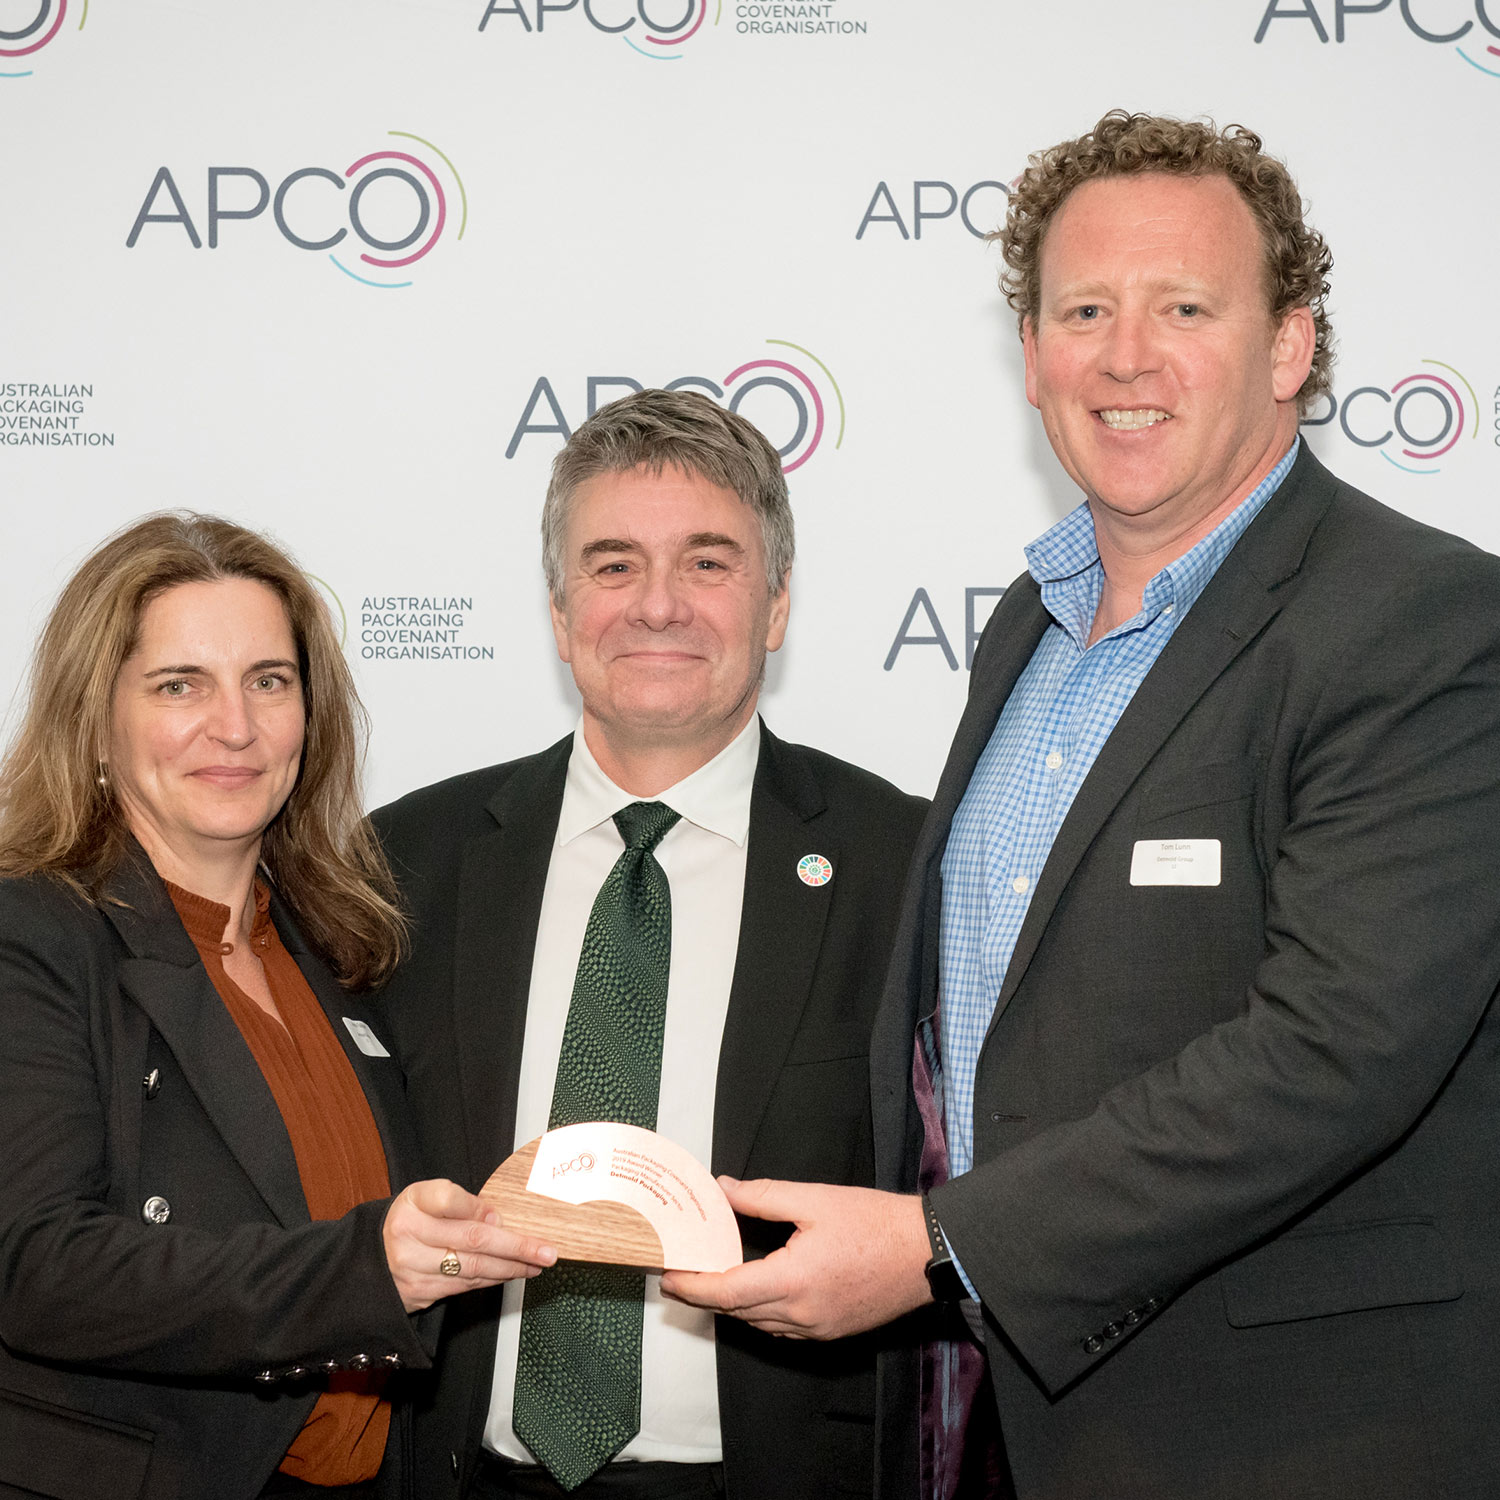 Detmold Group recognised at 2019 APCO Awards